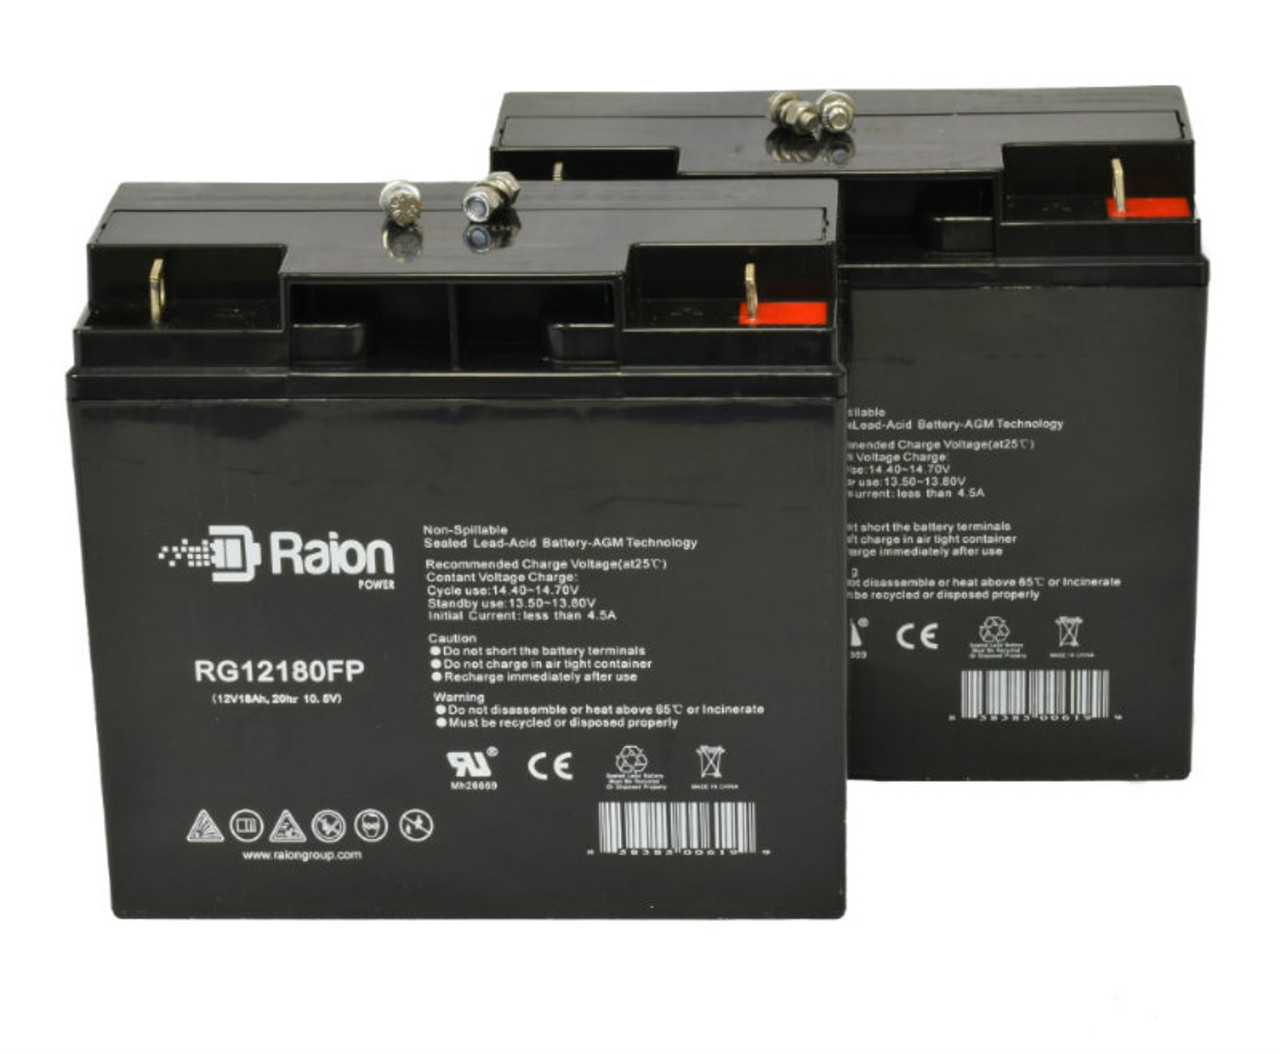 Raion Power Replacement RG12180FP 12V 18Ah Emergency Light Battery for IBT BT18-12 - 2 Pack